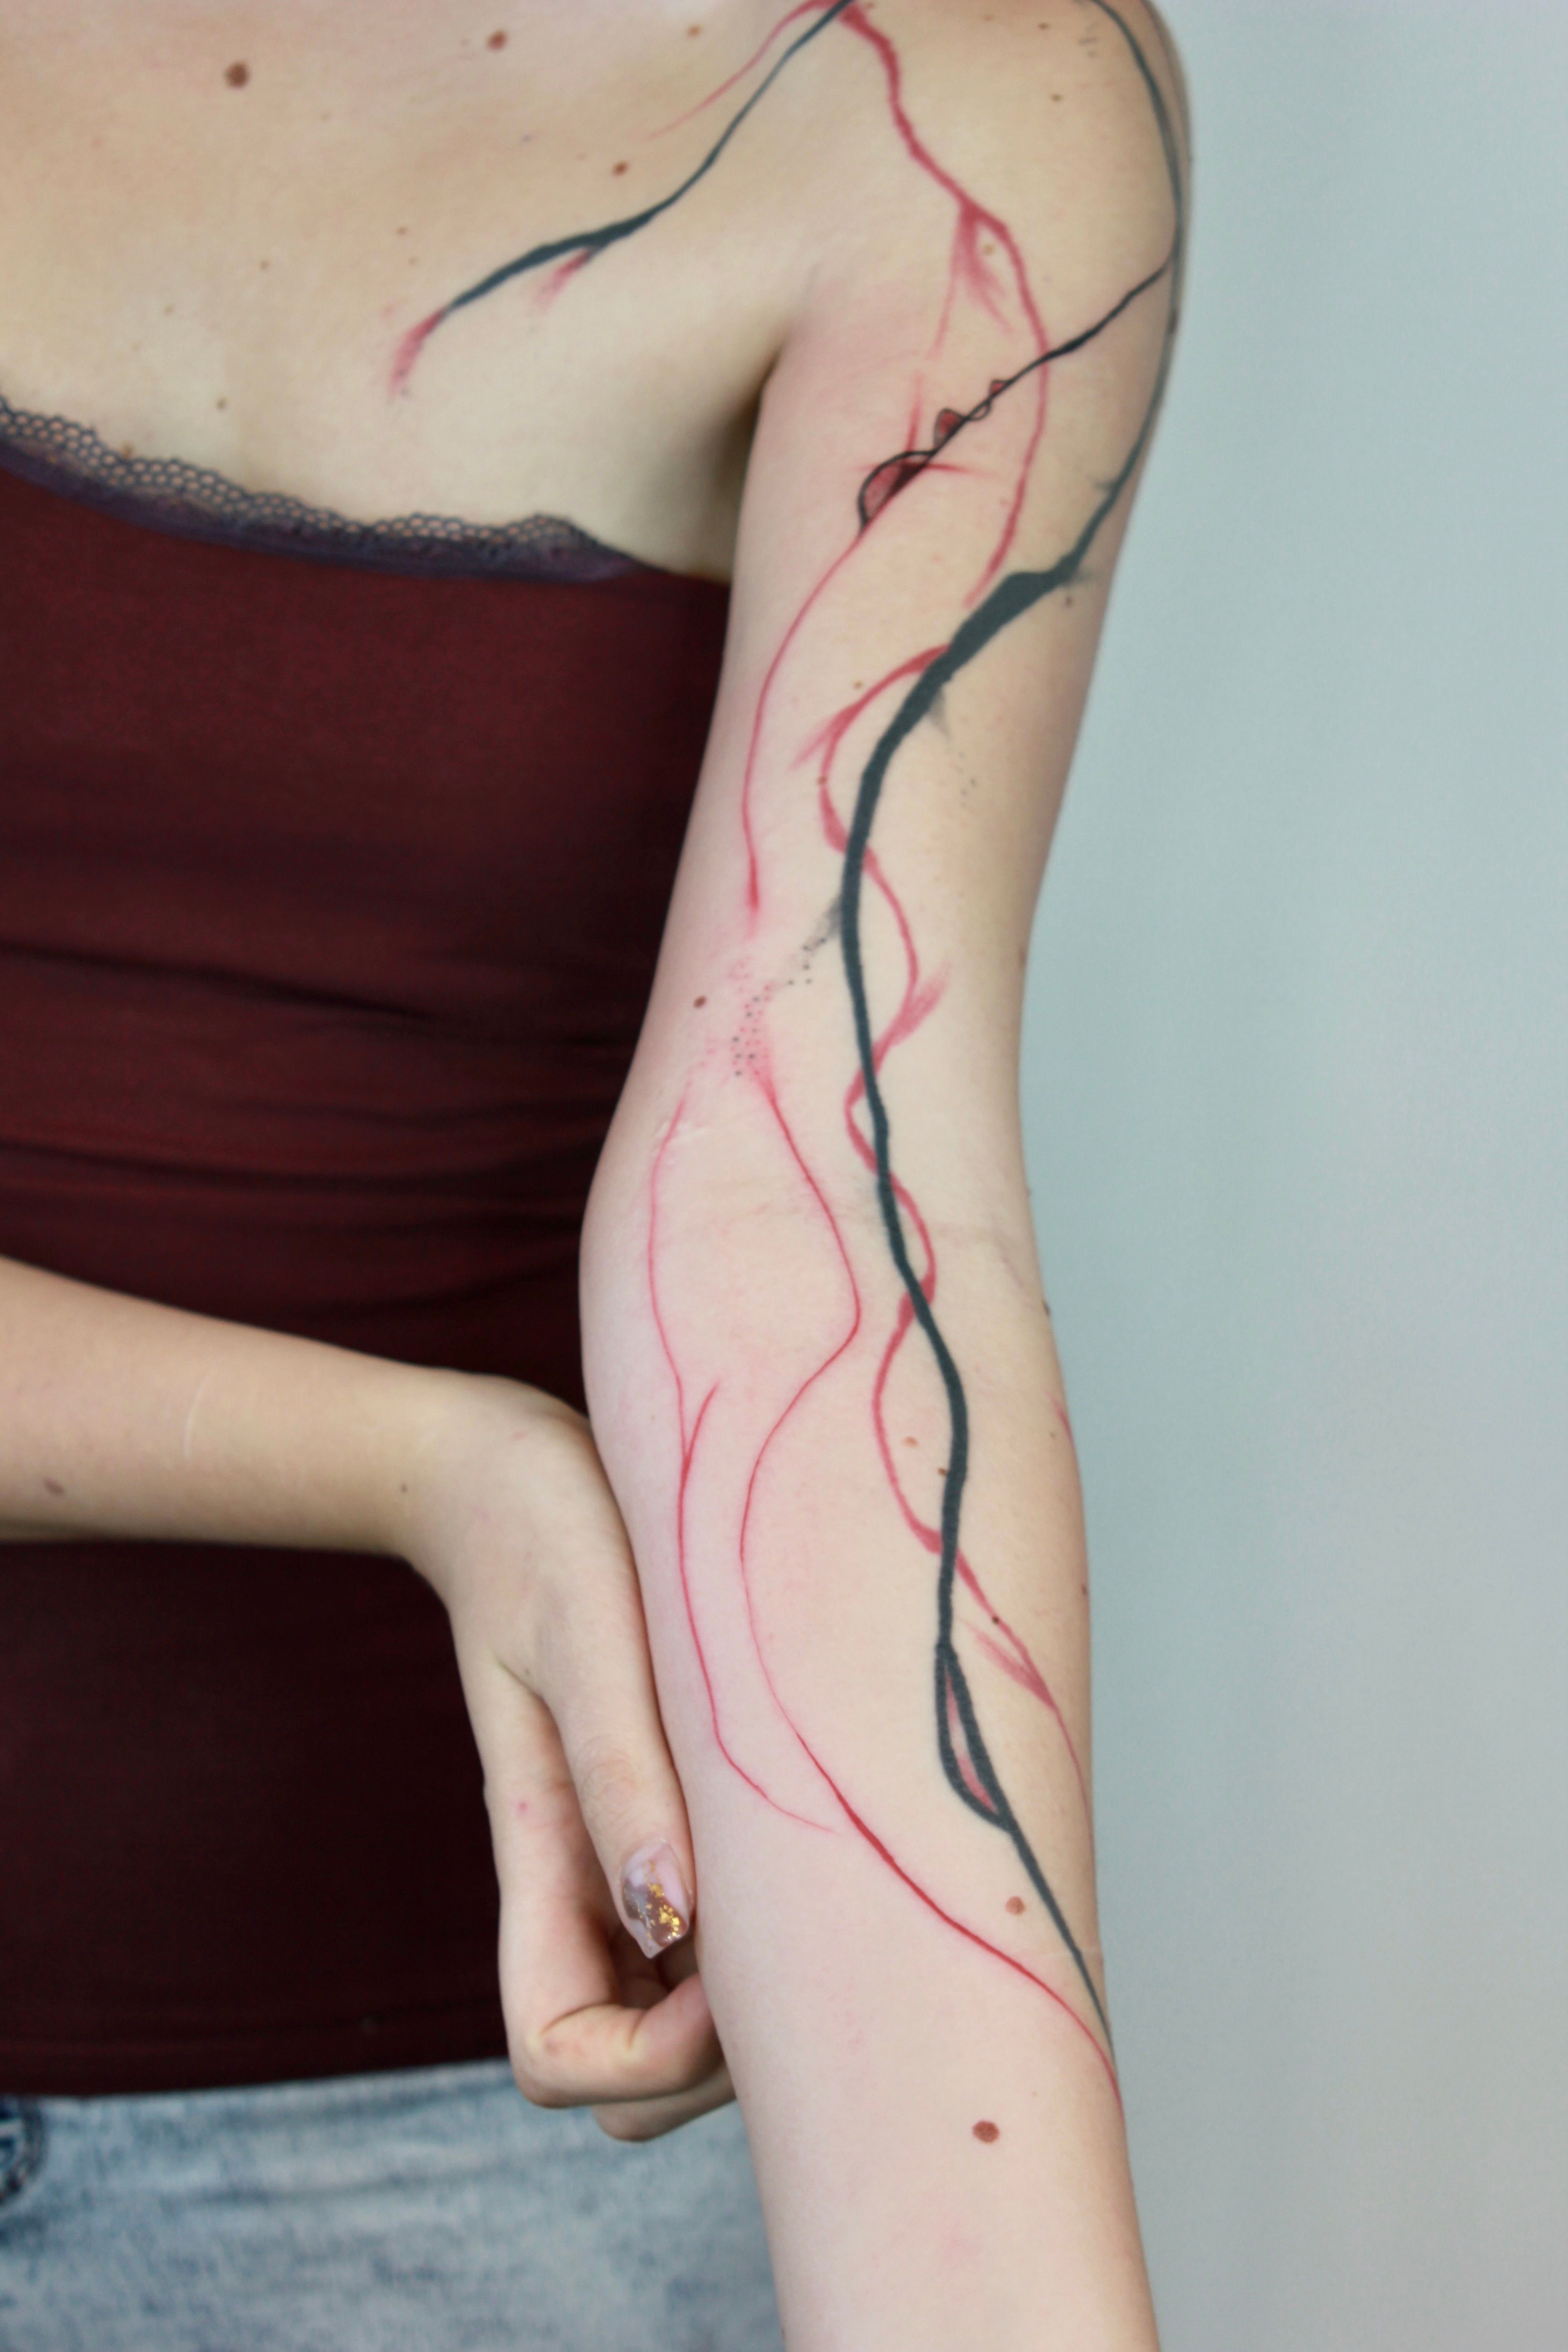 Can You Tattoo On Varicose Veins?